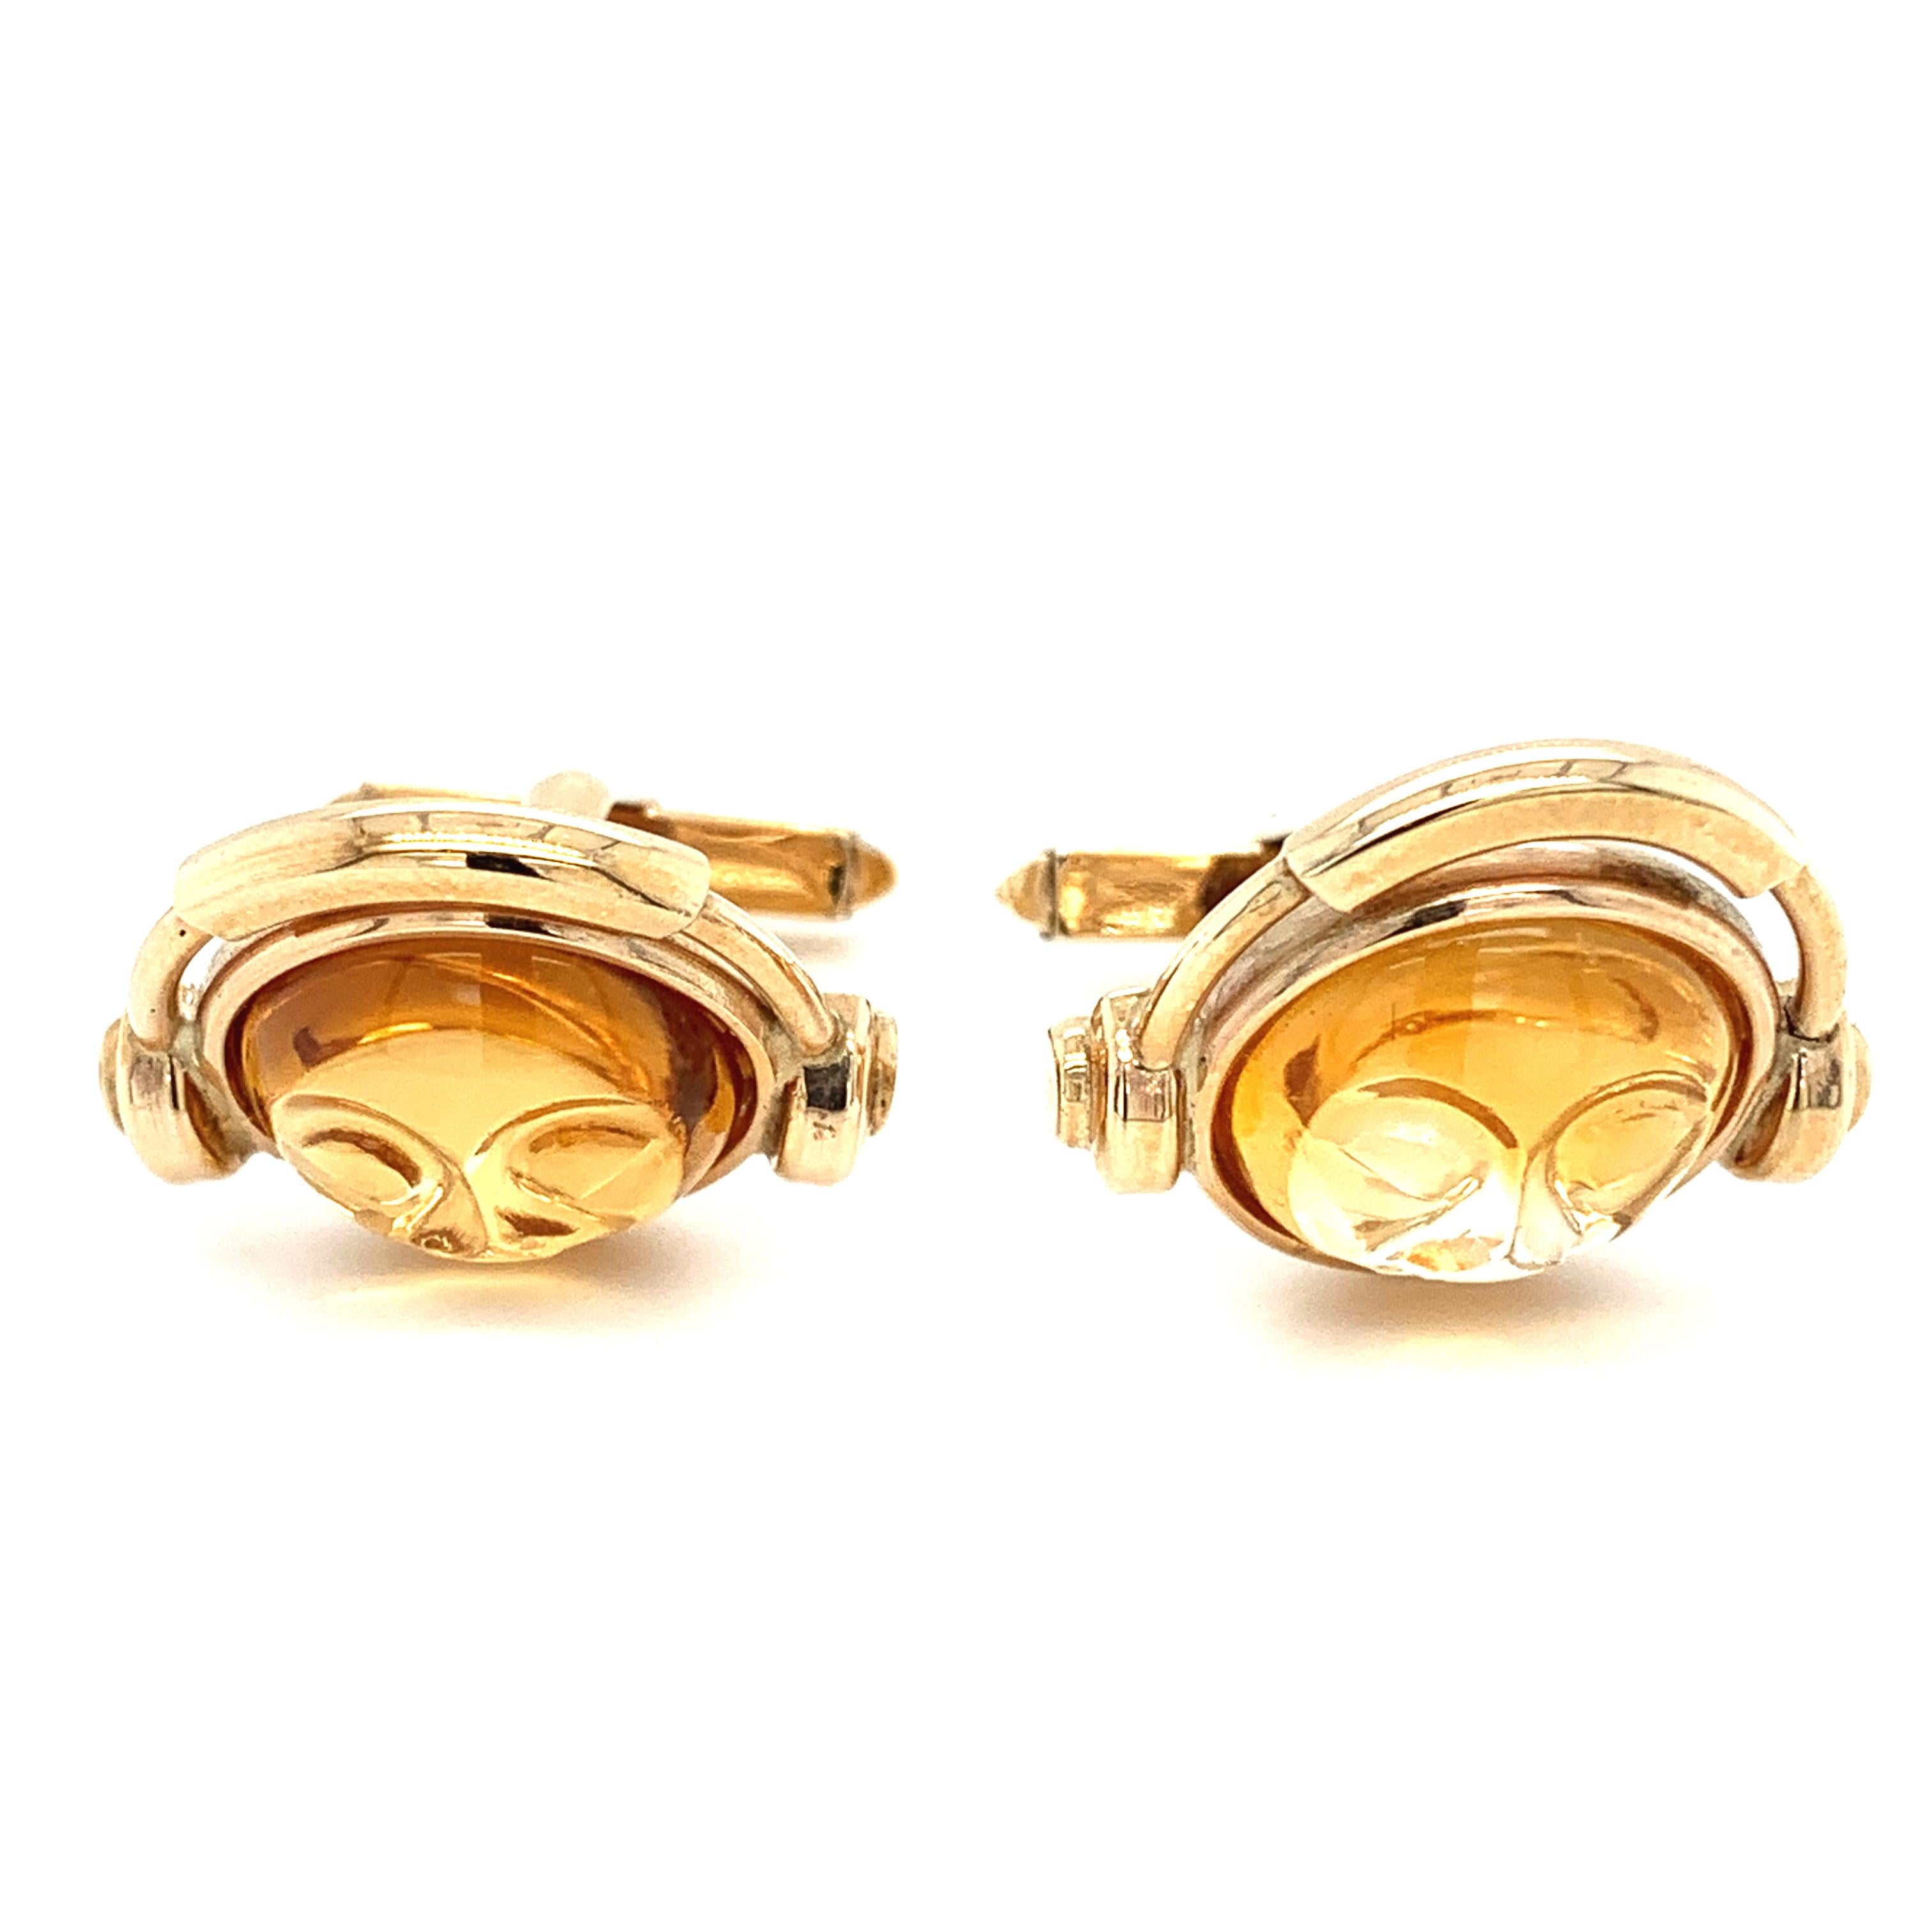 Art deco citrine gemstone gents cufflinks 9ct yellow gold.
Composed of natural citrine gemstone carved DJ shaped head design all mounted in 9ct yellow gold.
Citrine total gemstone weight 15.00ct natural carved citrine DJ head shaped.
Large citrine